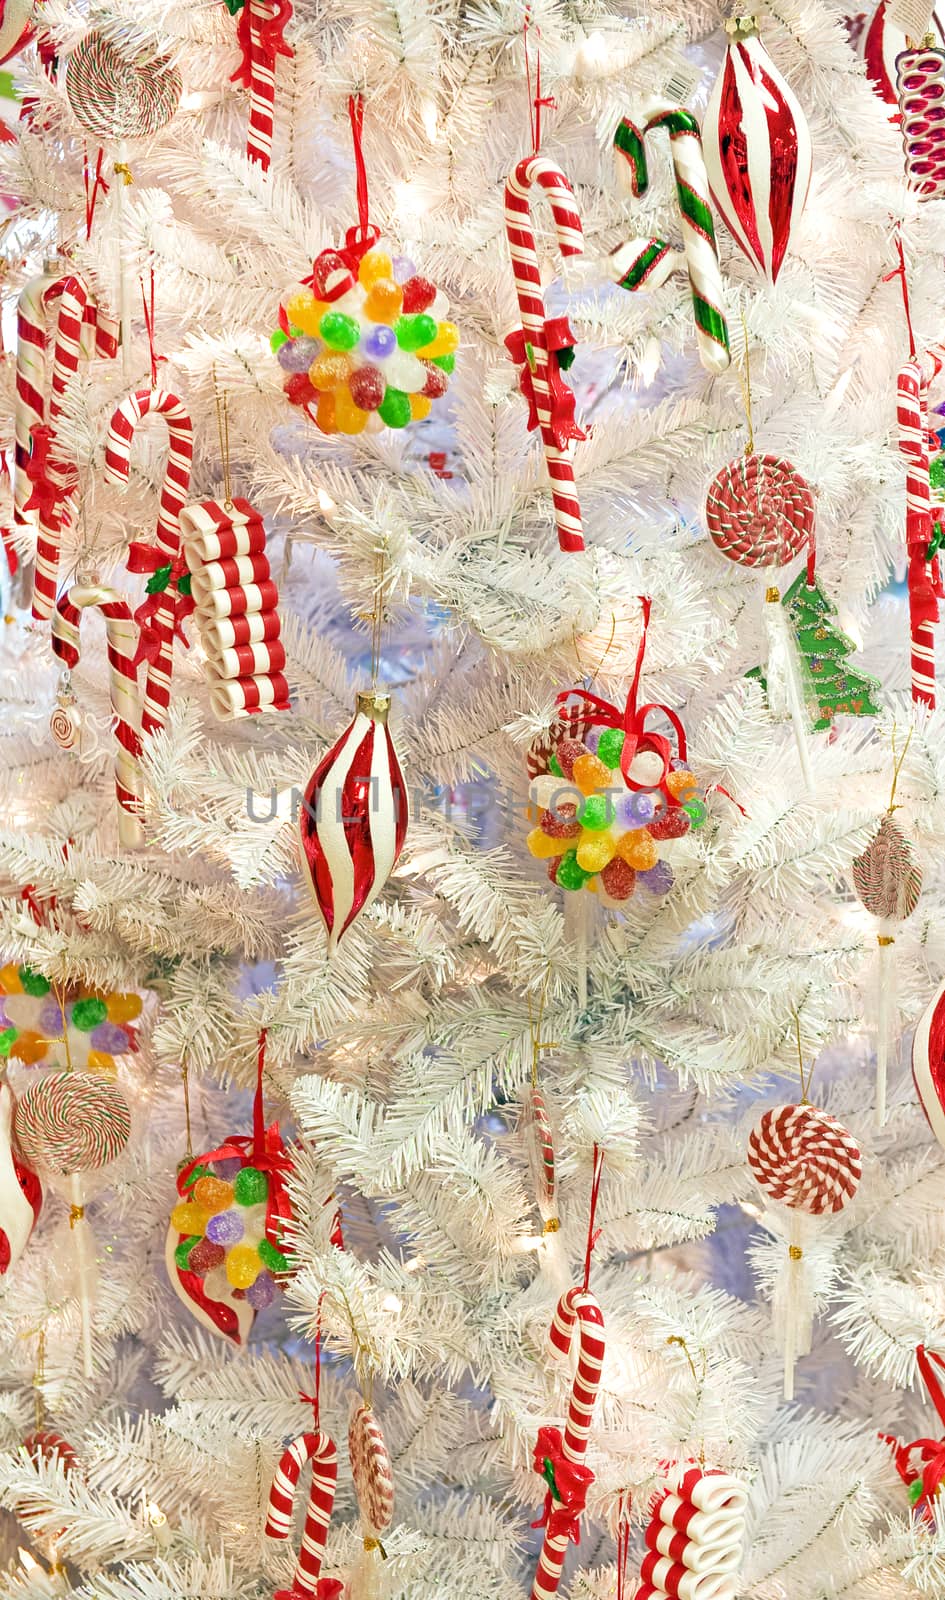 Candy Coated Christmas Tree by stockbuster1